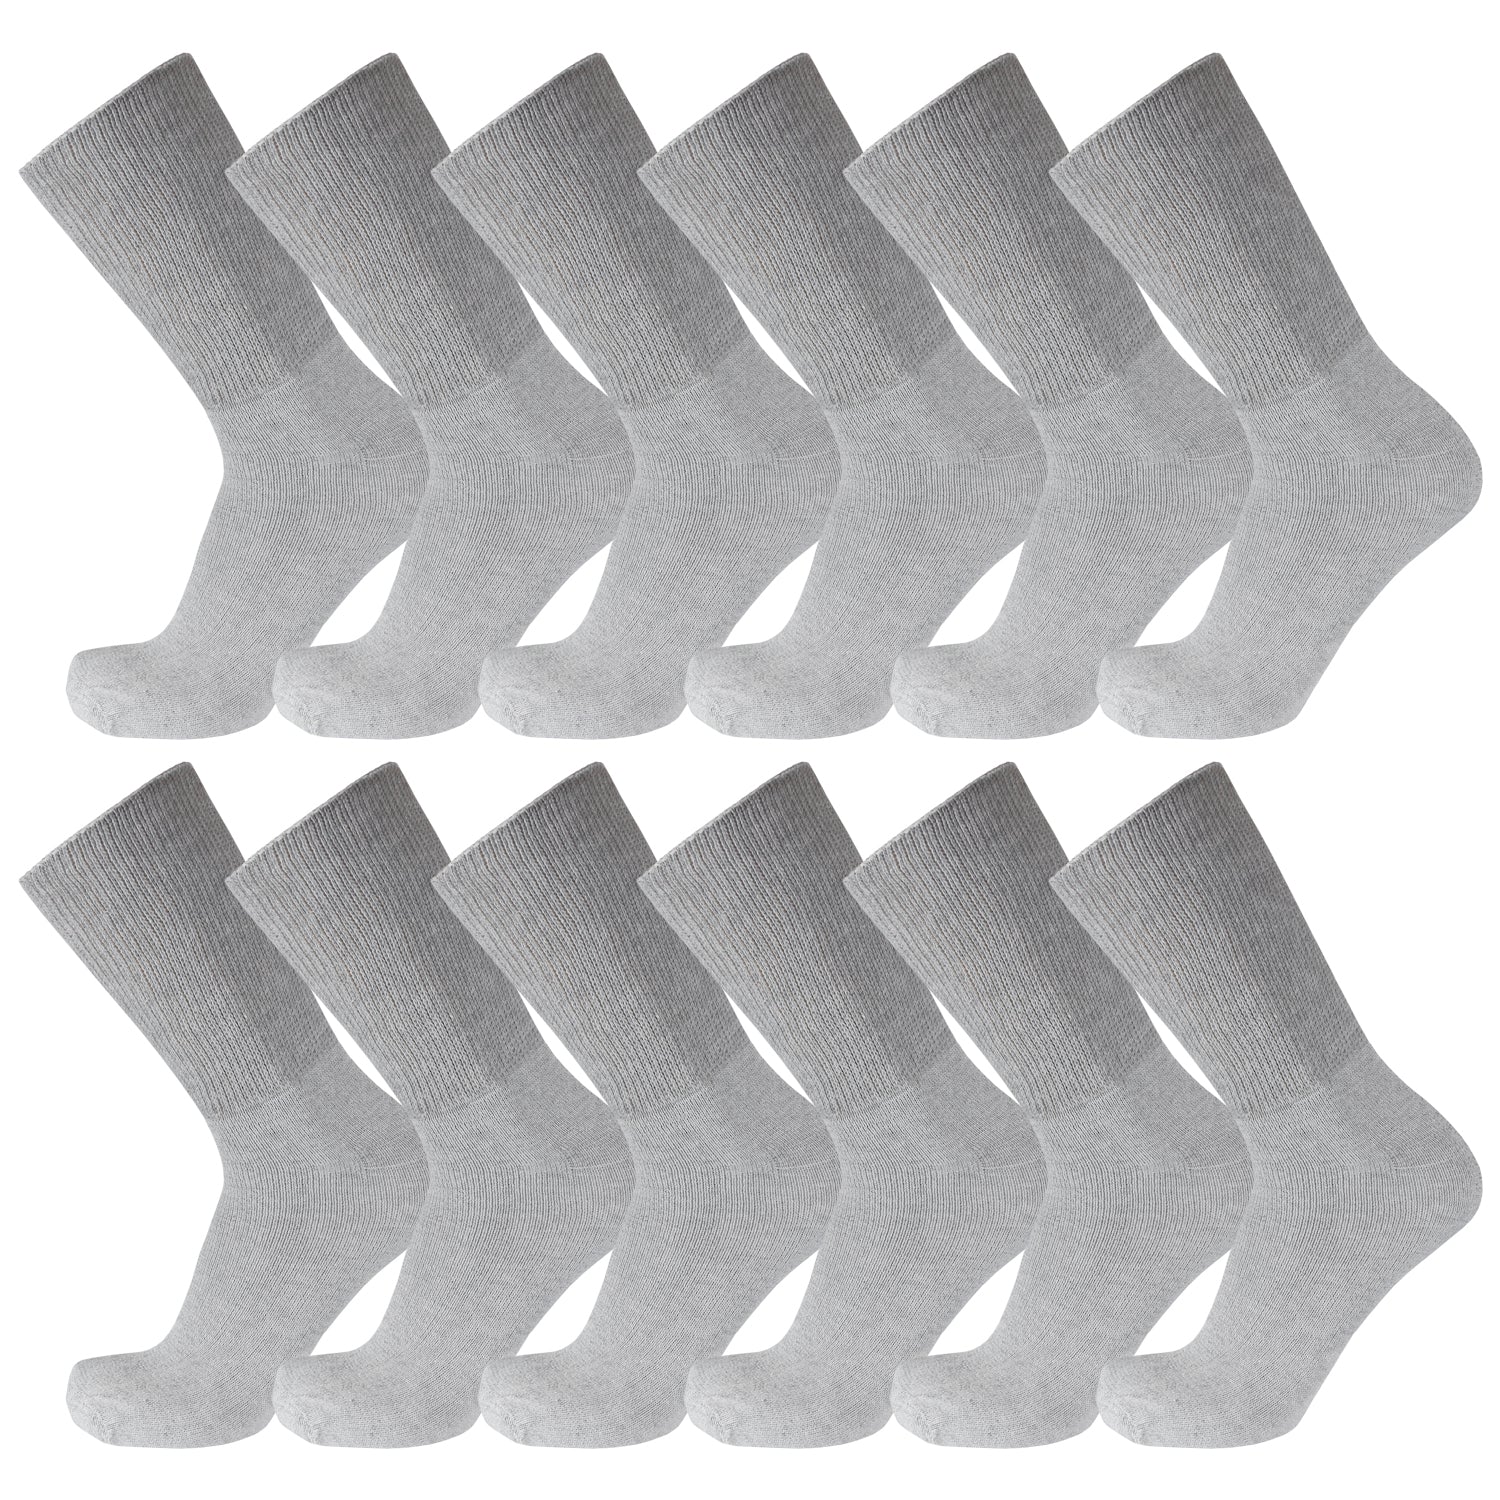 Gray Cotton Diabetic Crew Socks With Wide Nonbinding Top 12 Pack